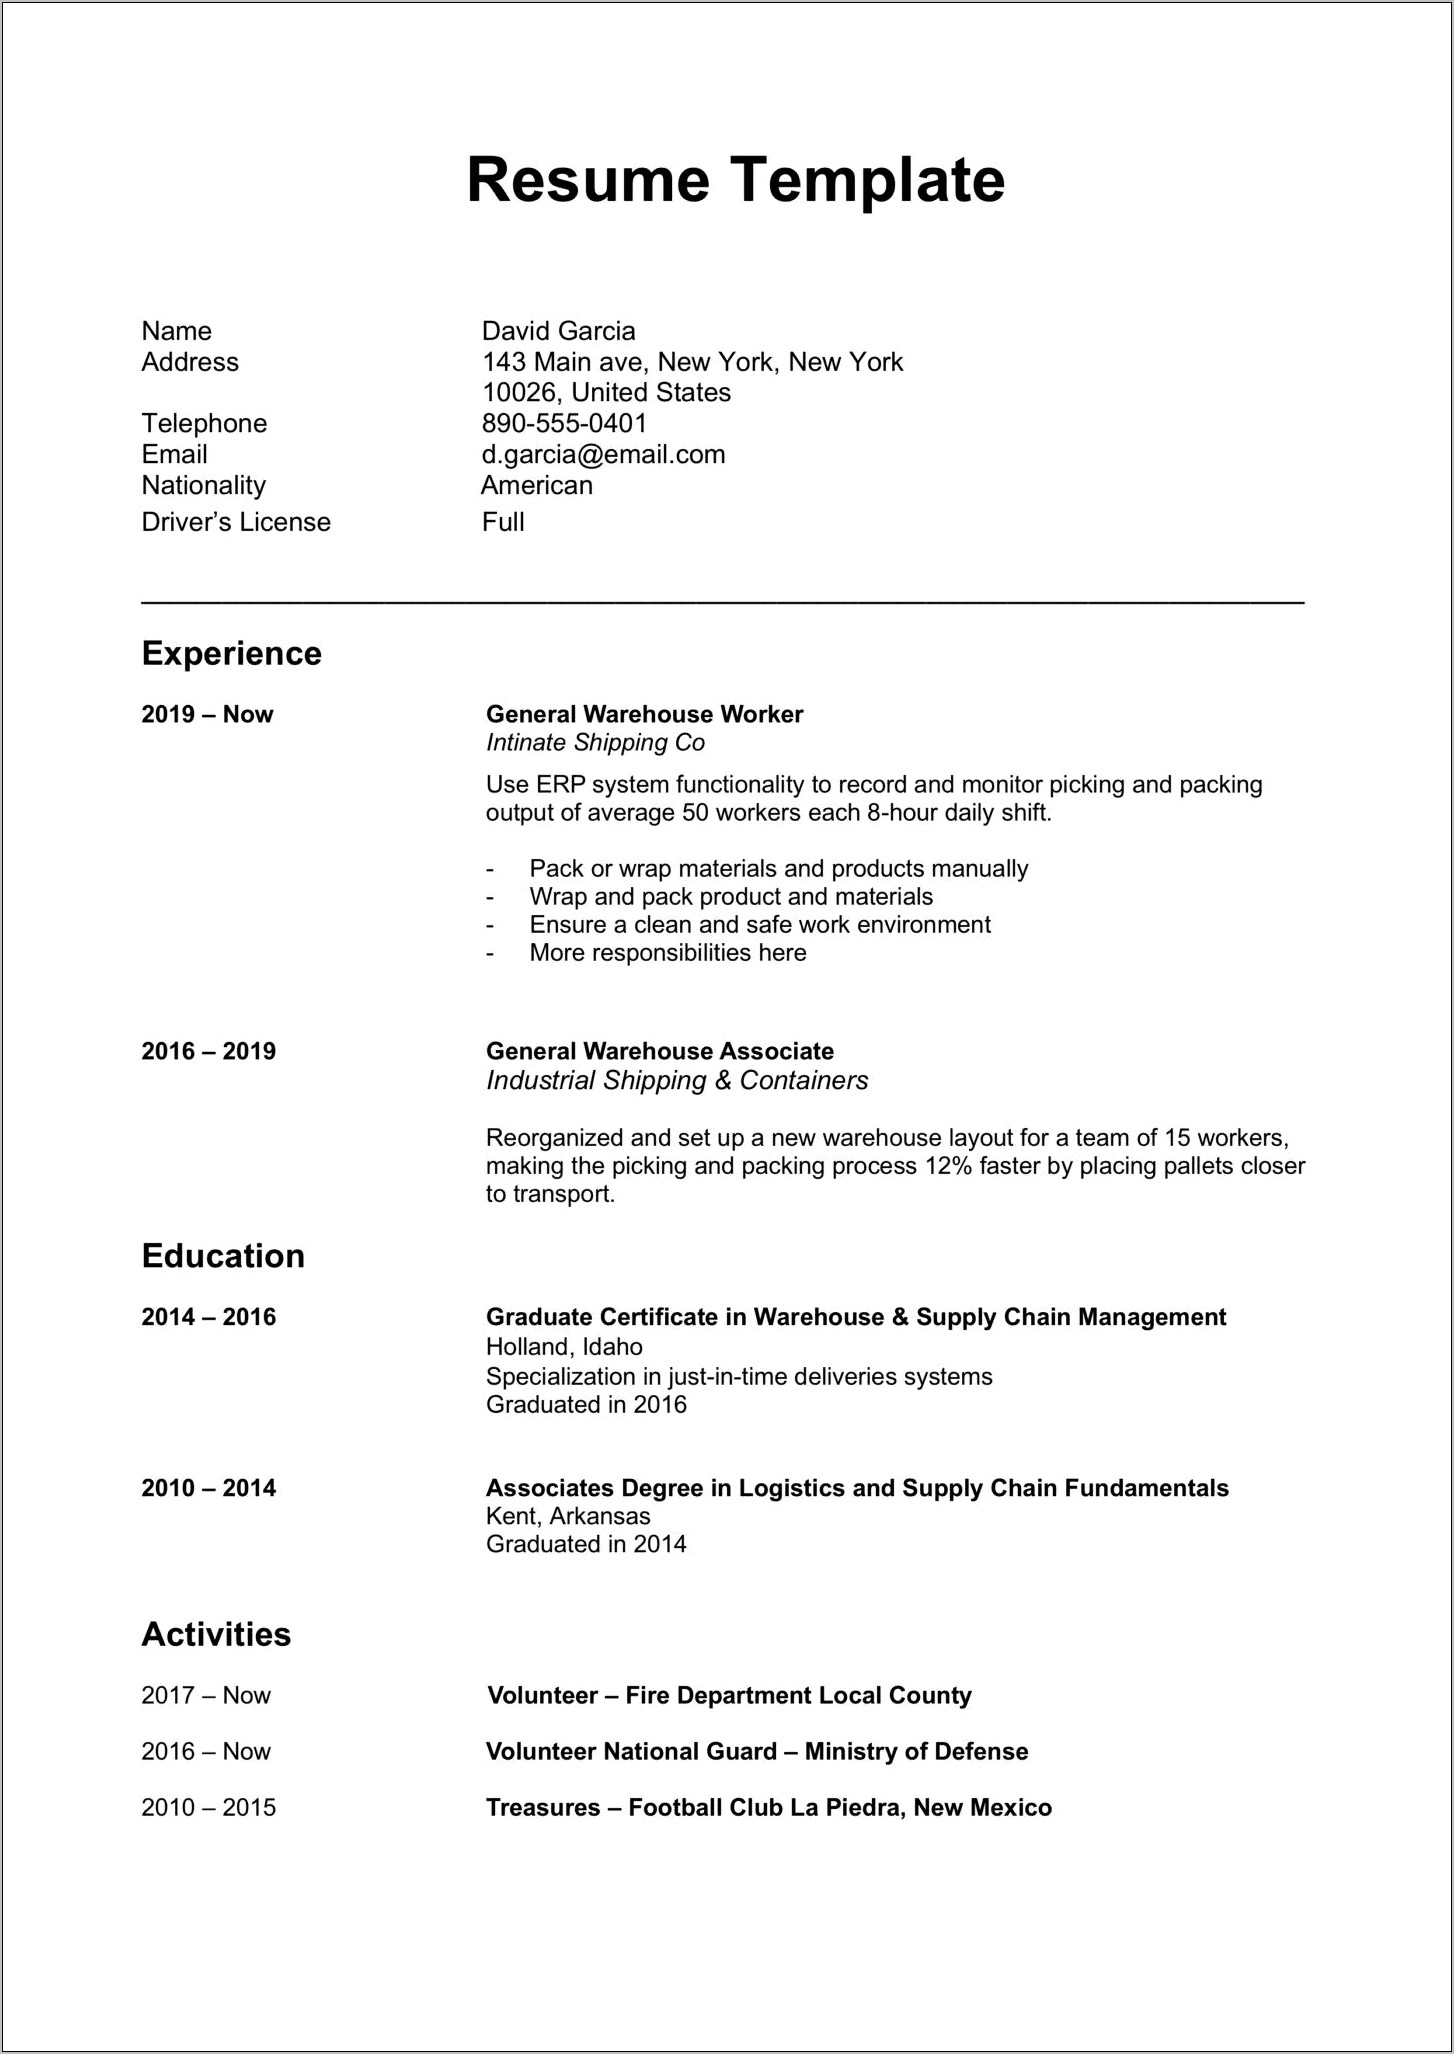 Resume Format In Word File For Freshers